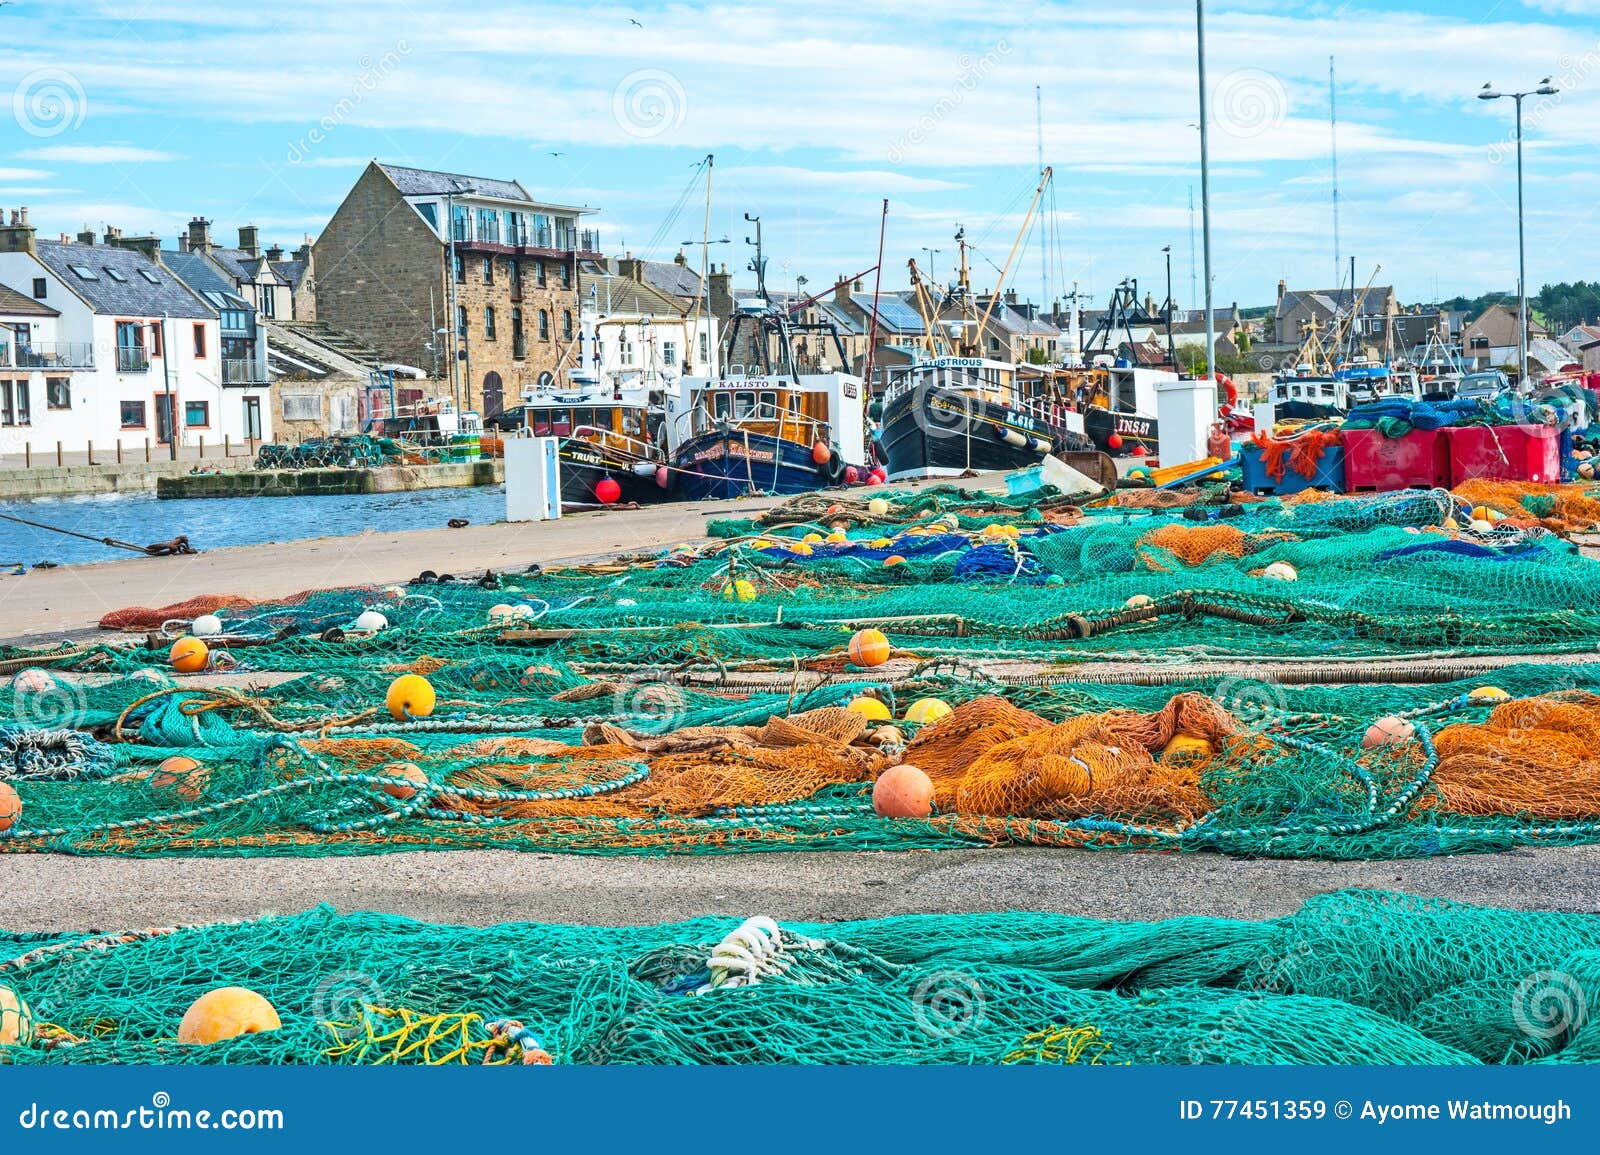 burghead harbor with fishing boats editorial stock image